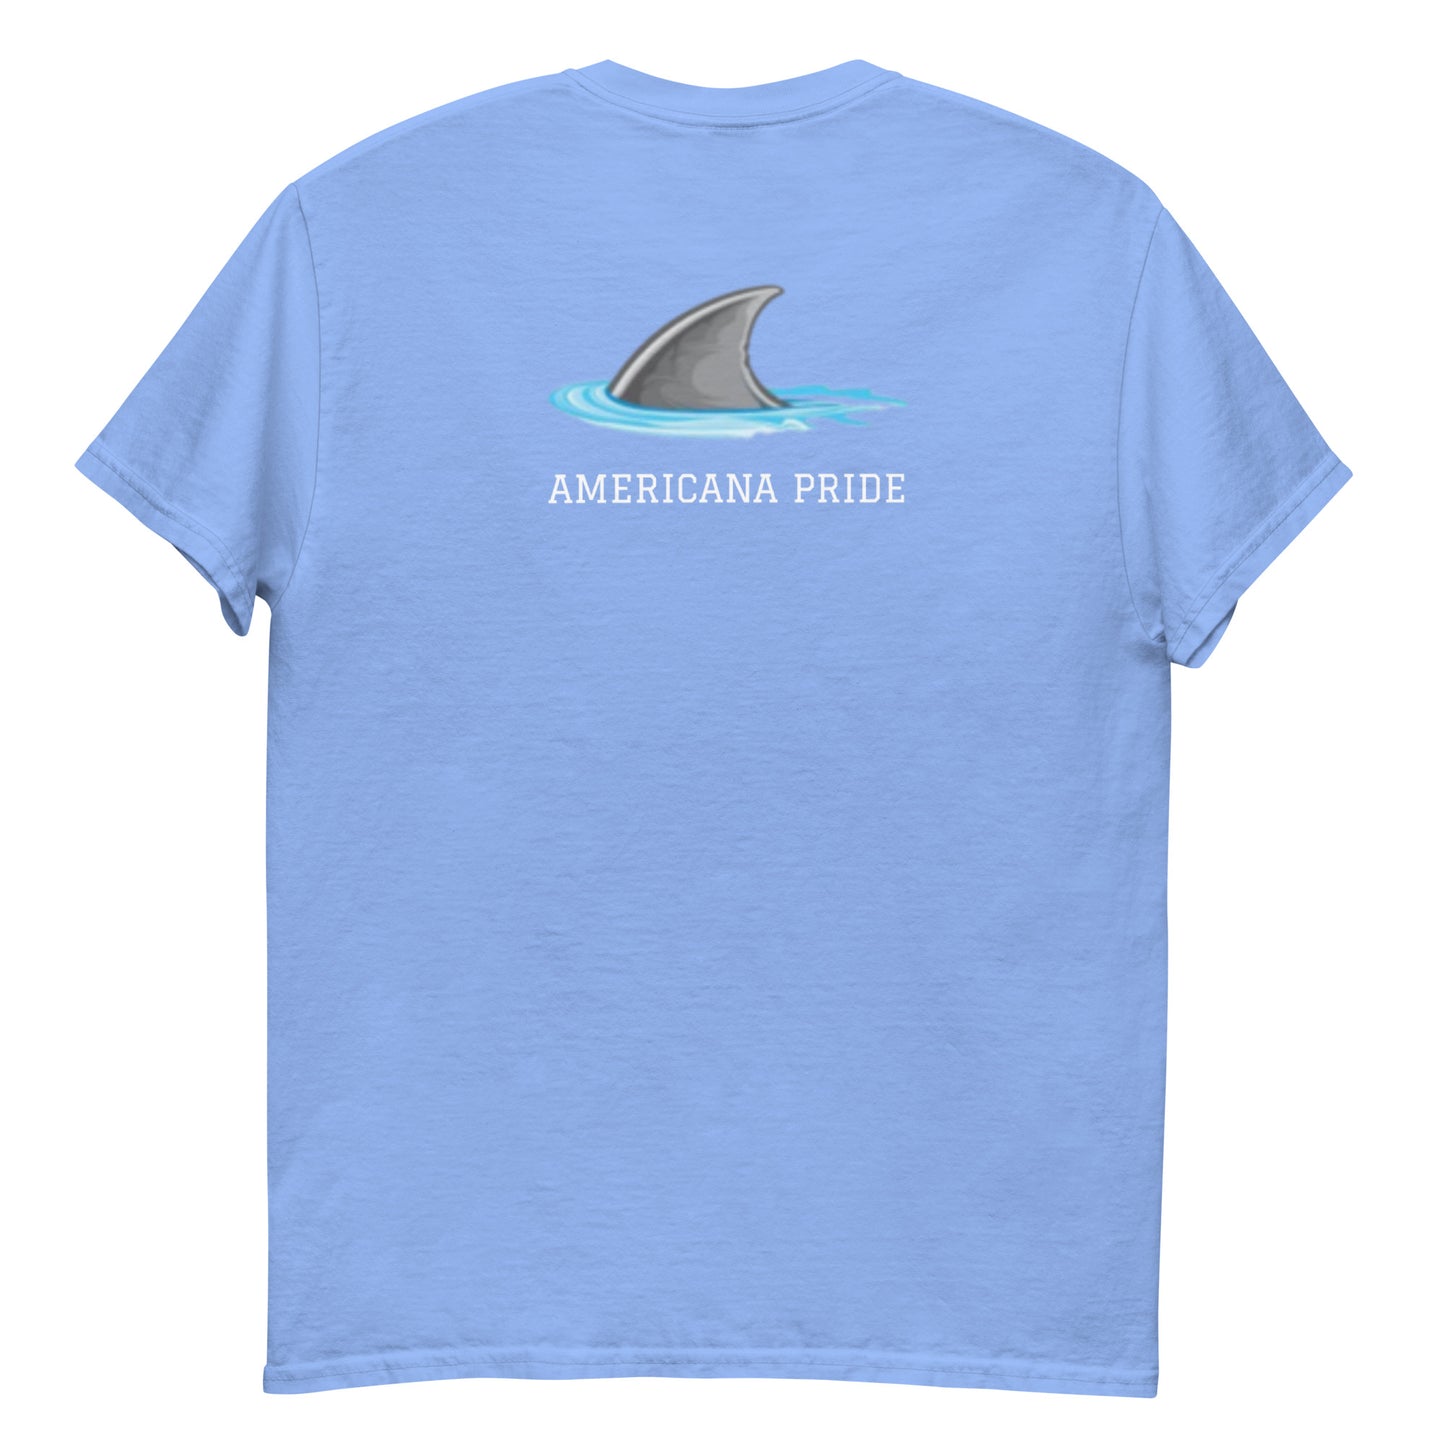 Are you the SHARK or the minnow? classic tee (white lettering)